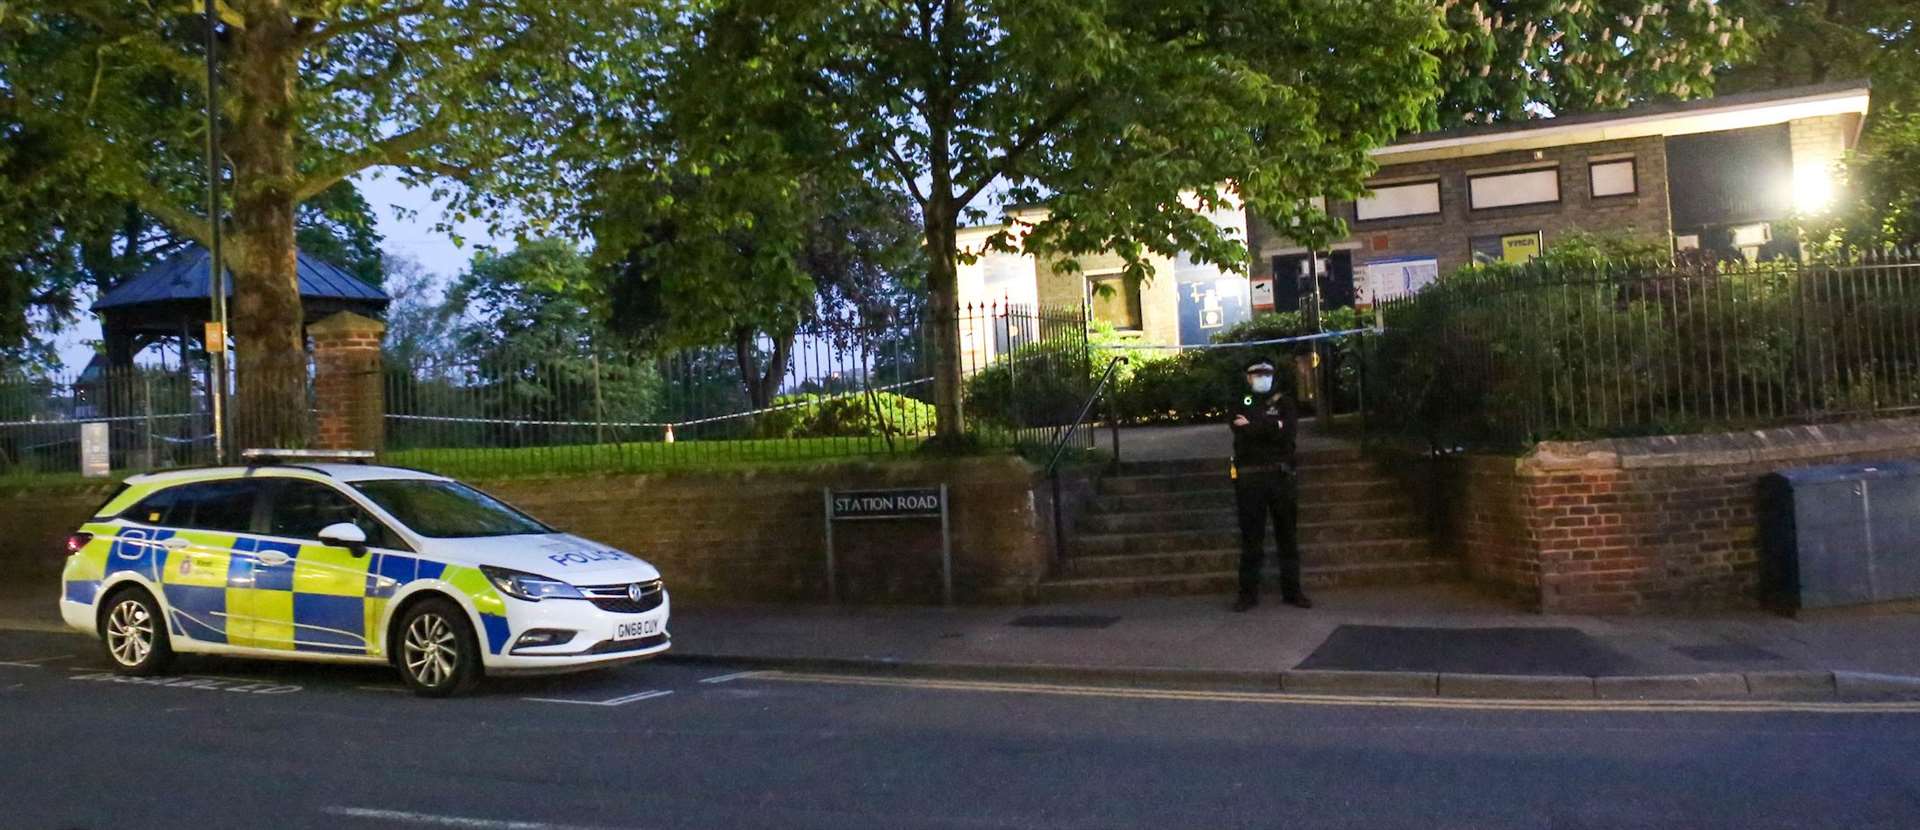 Police at Brenchley Gardens in May. Picture: UKNIP